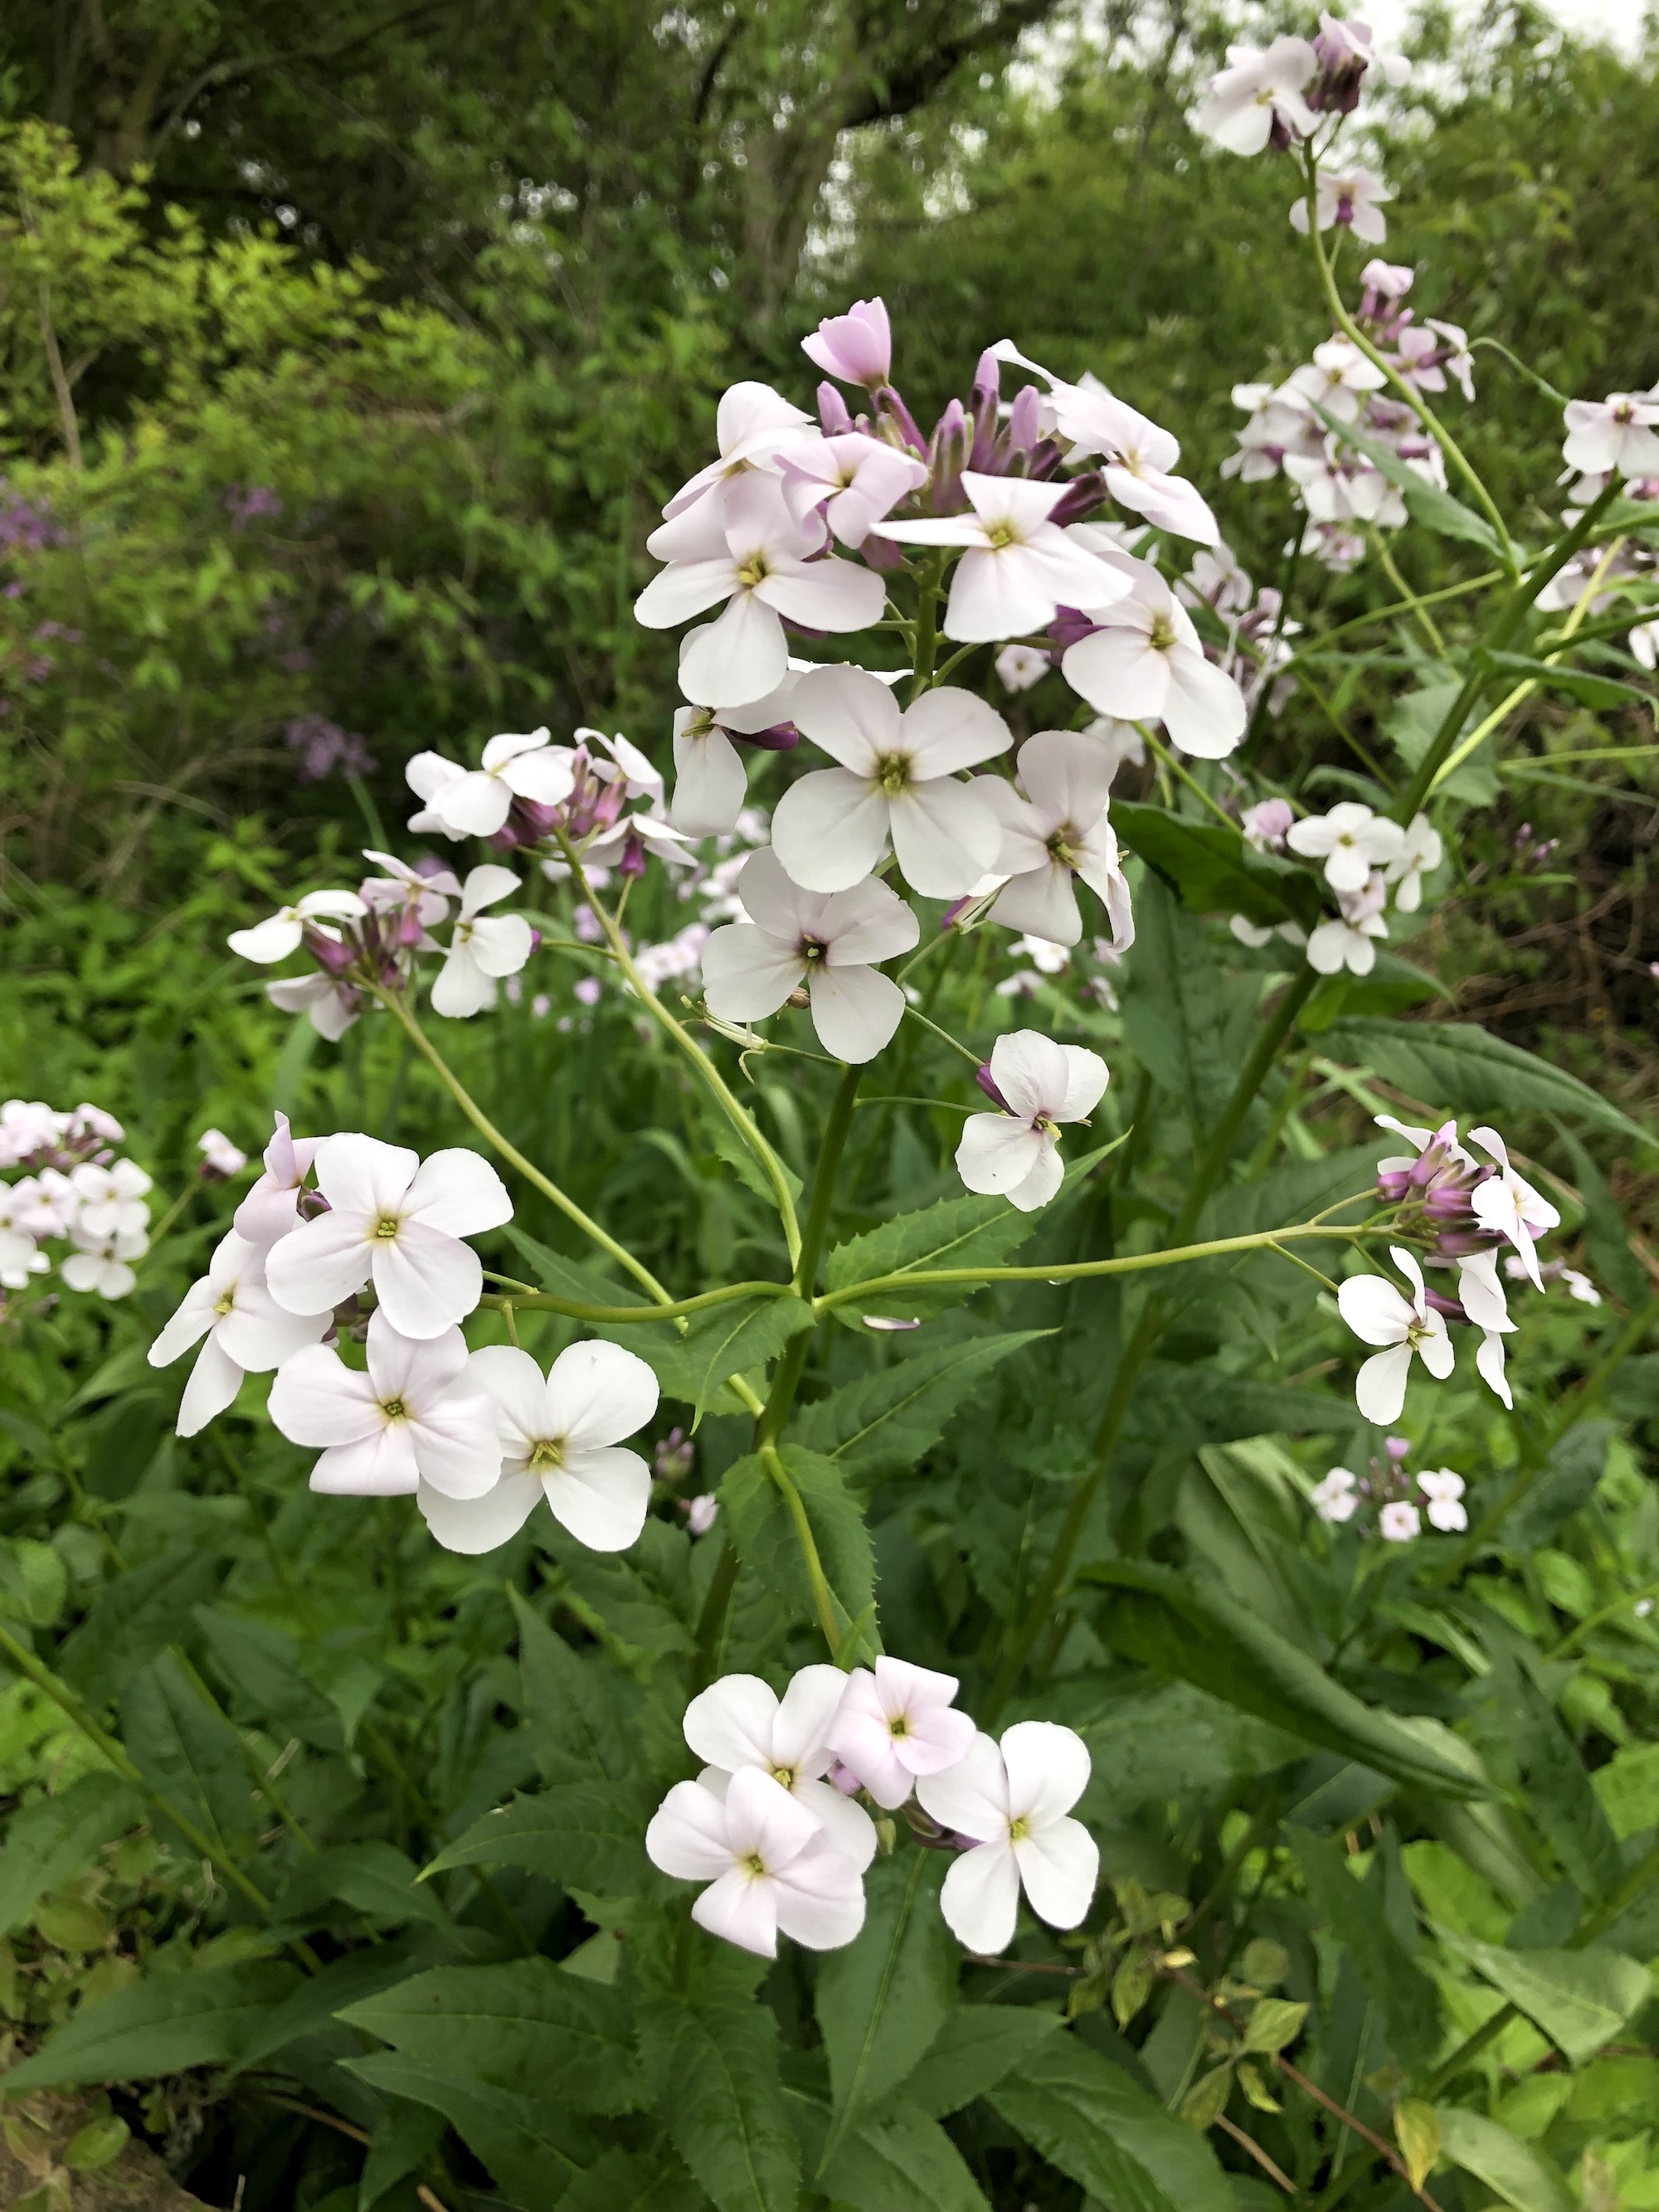 Dame's Rocket in woods between Marion Dunn and Oak Savanna on May 28, 2019.